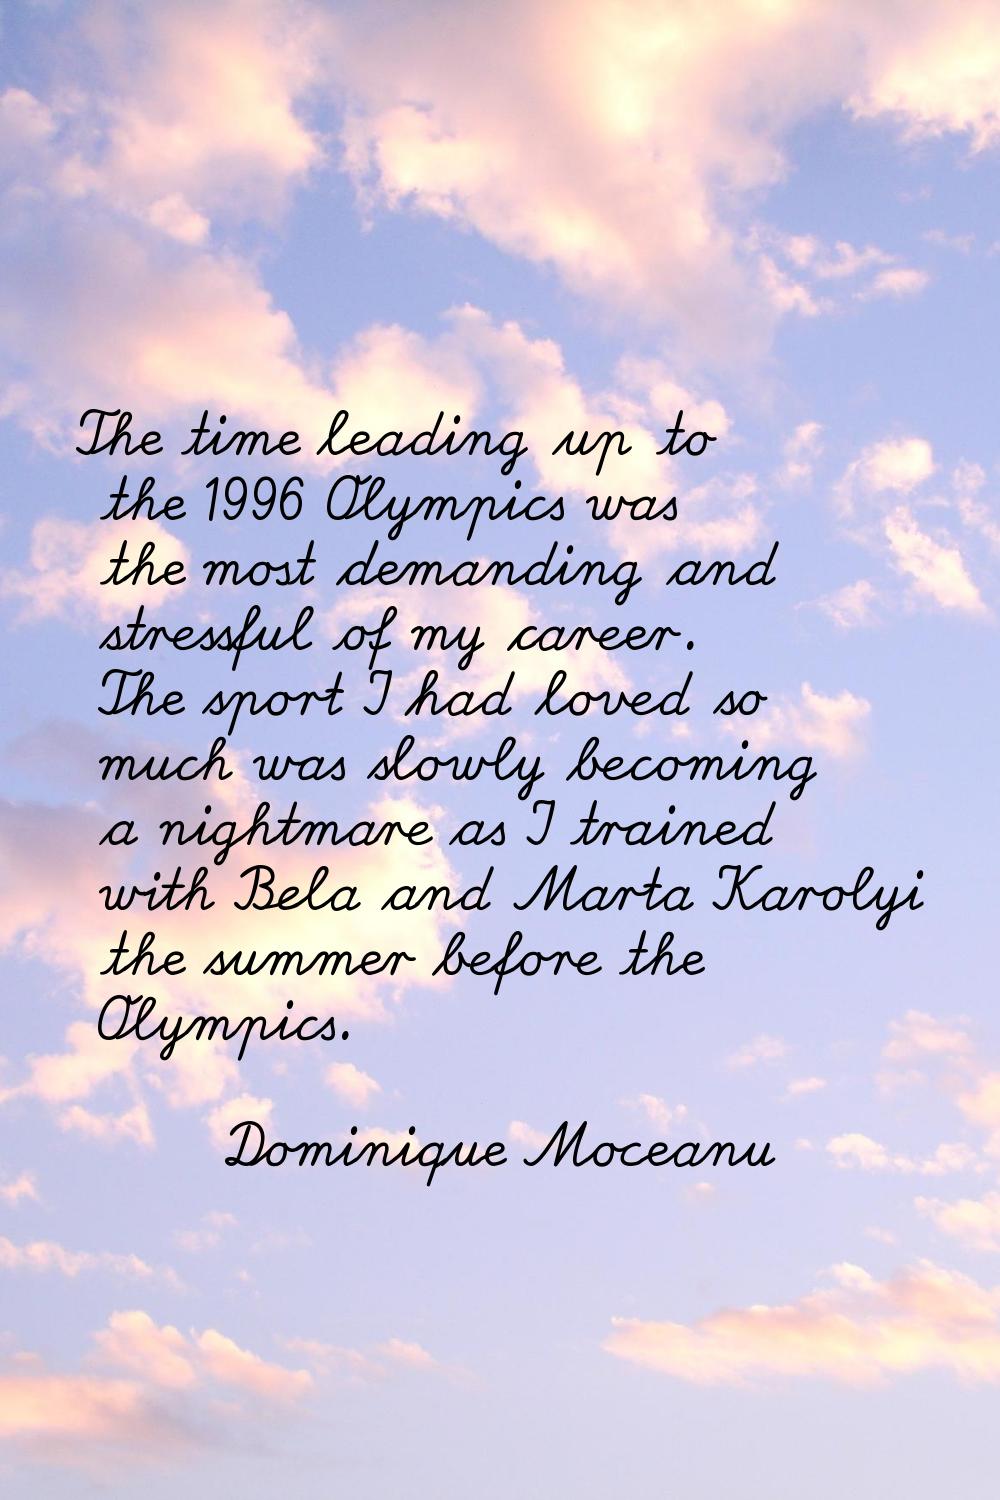 The time leading up to the 1996 Olympics was the most demanding and stressful of my career. The spo